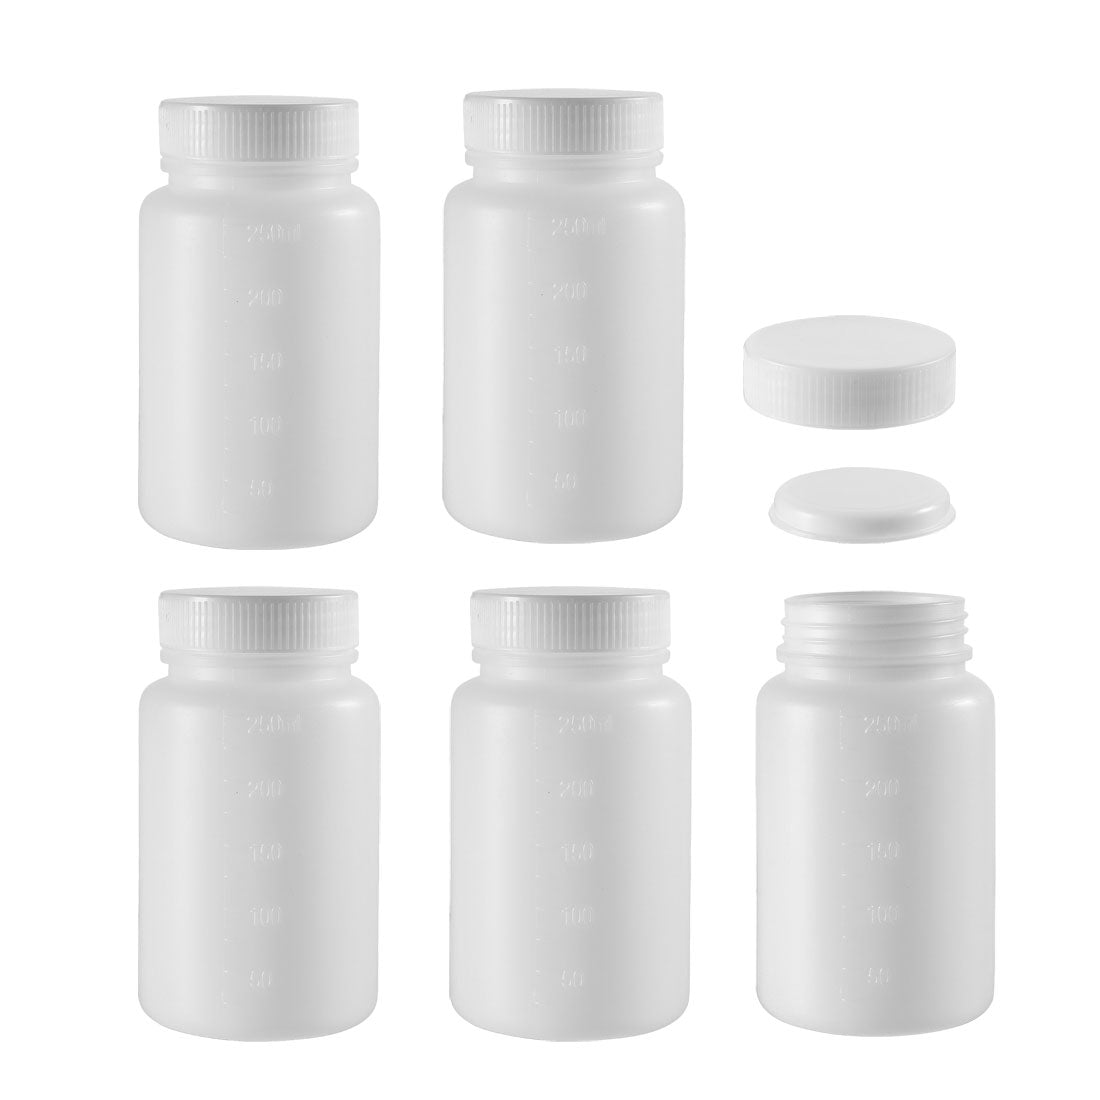 uxcell Uxcell Plastic Lab Chemical Reagent Bottle 250ml/8.5oz Wide Mouth Sample Sealing Liquid Storage Container 5pcs